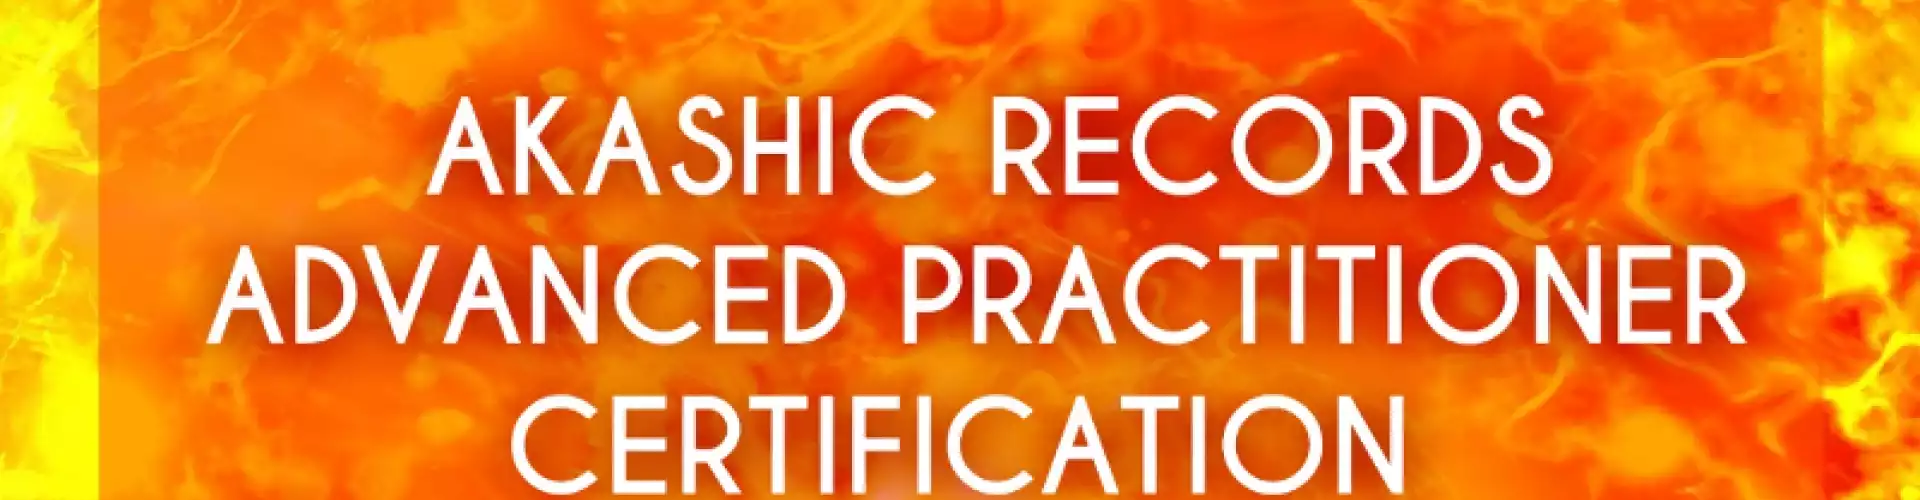 Akashic Records  Advanced Practitioner Certification - August 21, 2020 - Amy Mak